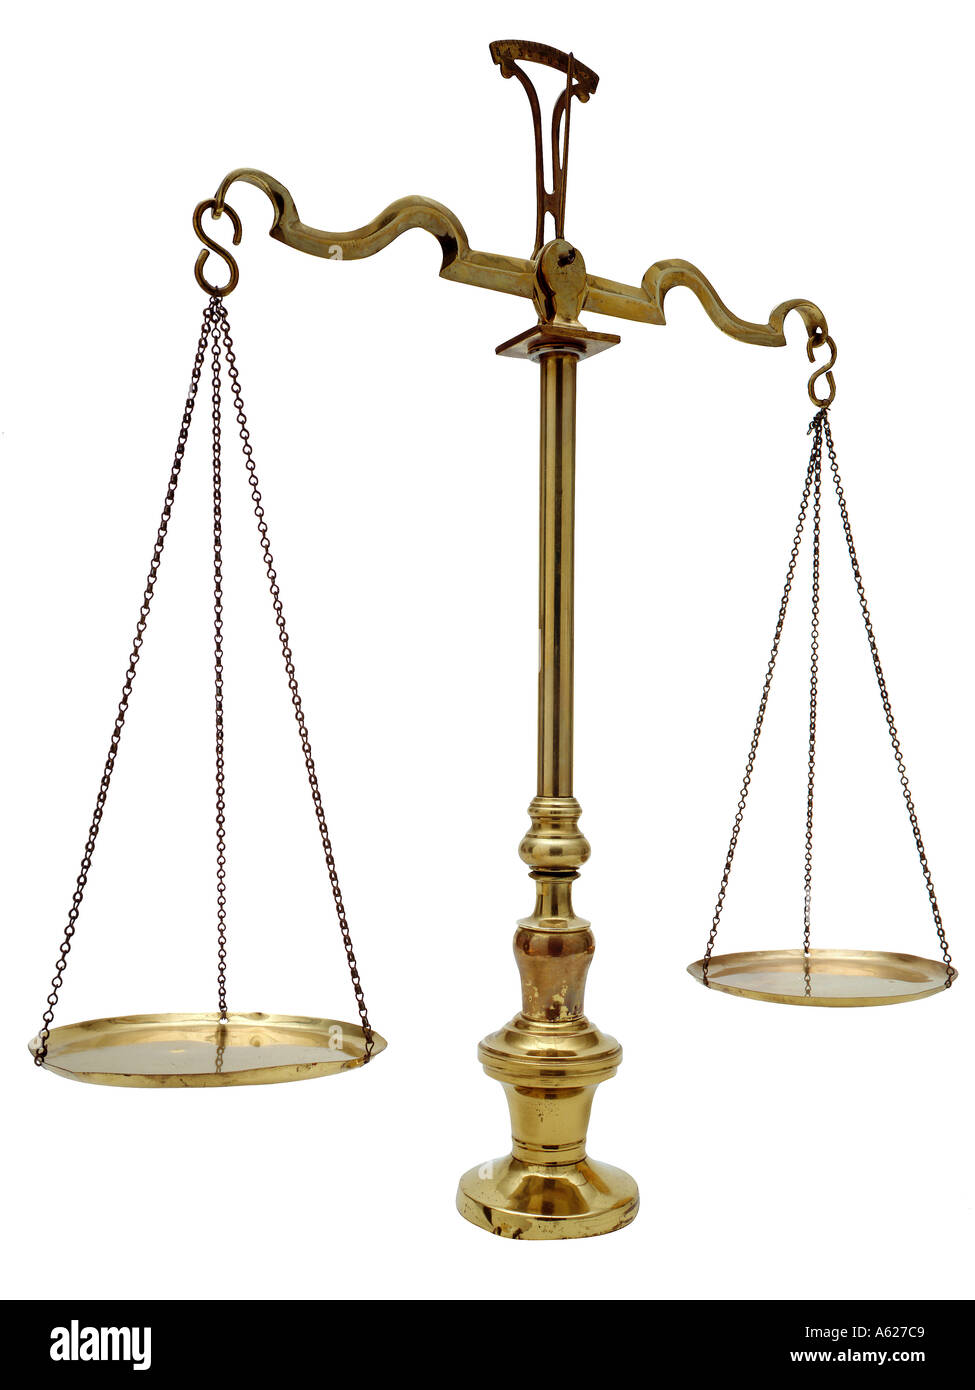 Gold measuring scale or balance Stock Photo